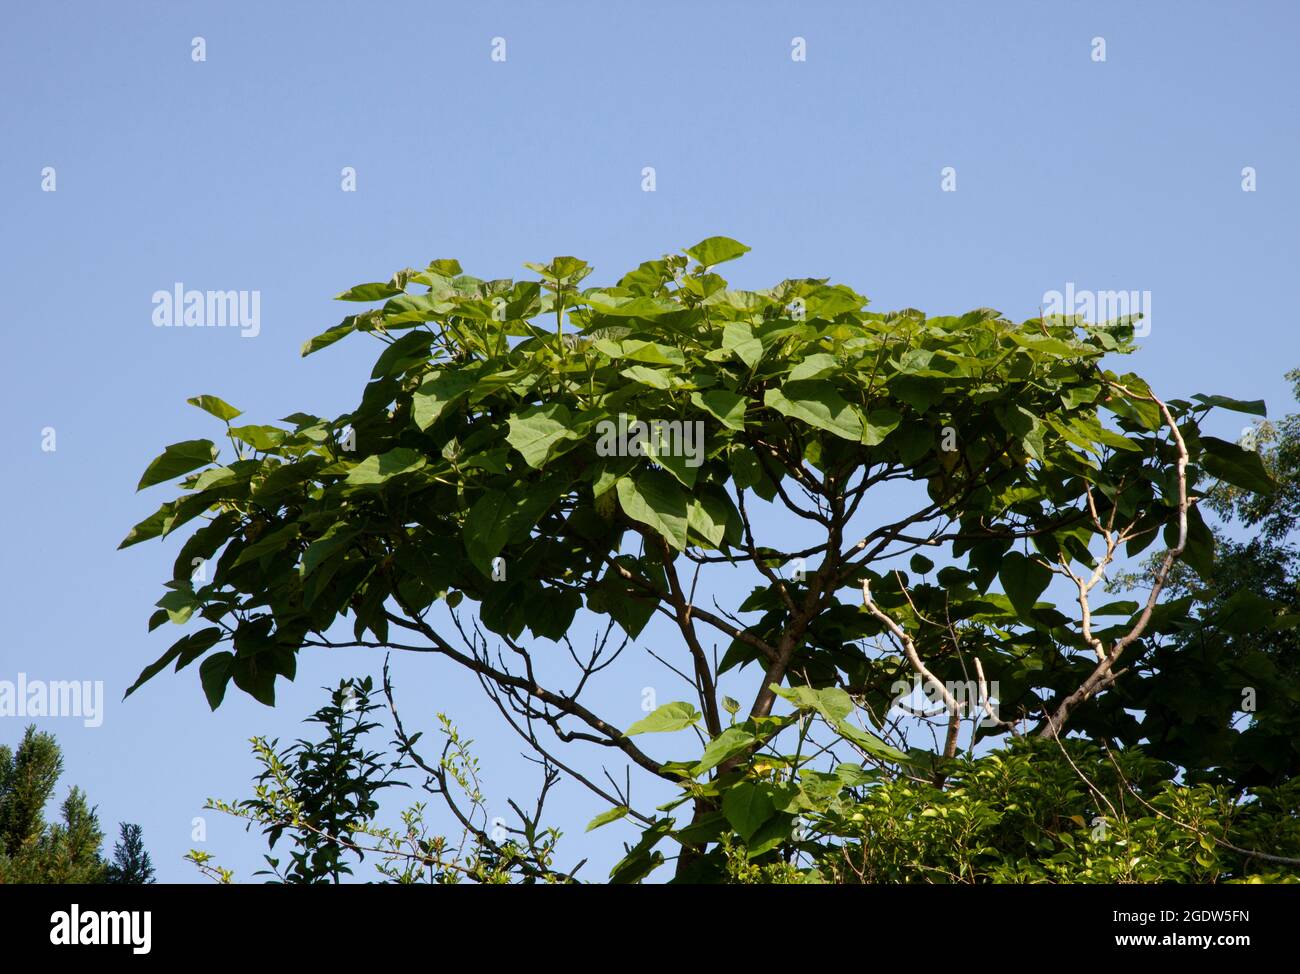 A single shoot from a dead Foxglove tree, Paulownia, has burst into bloom with a fine crop of foliage Stock Photo